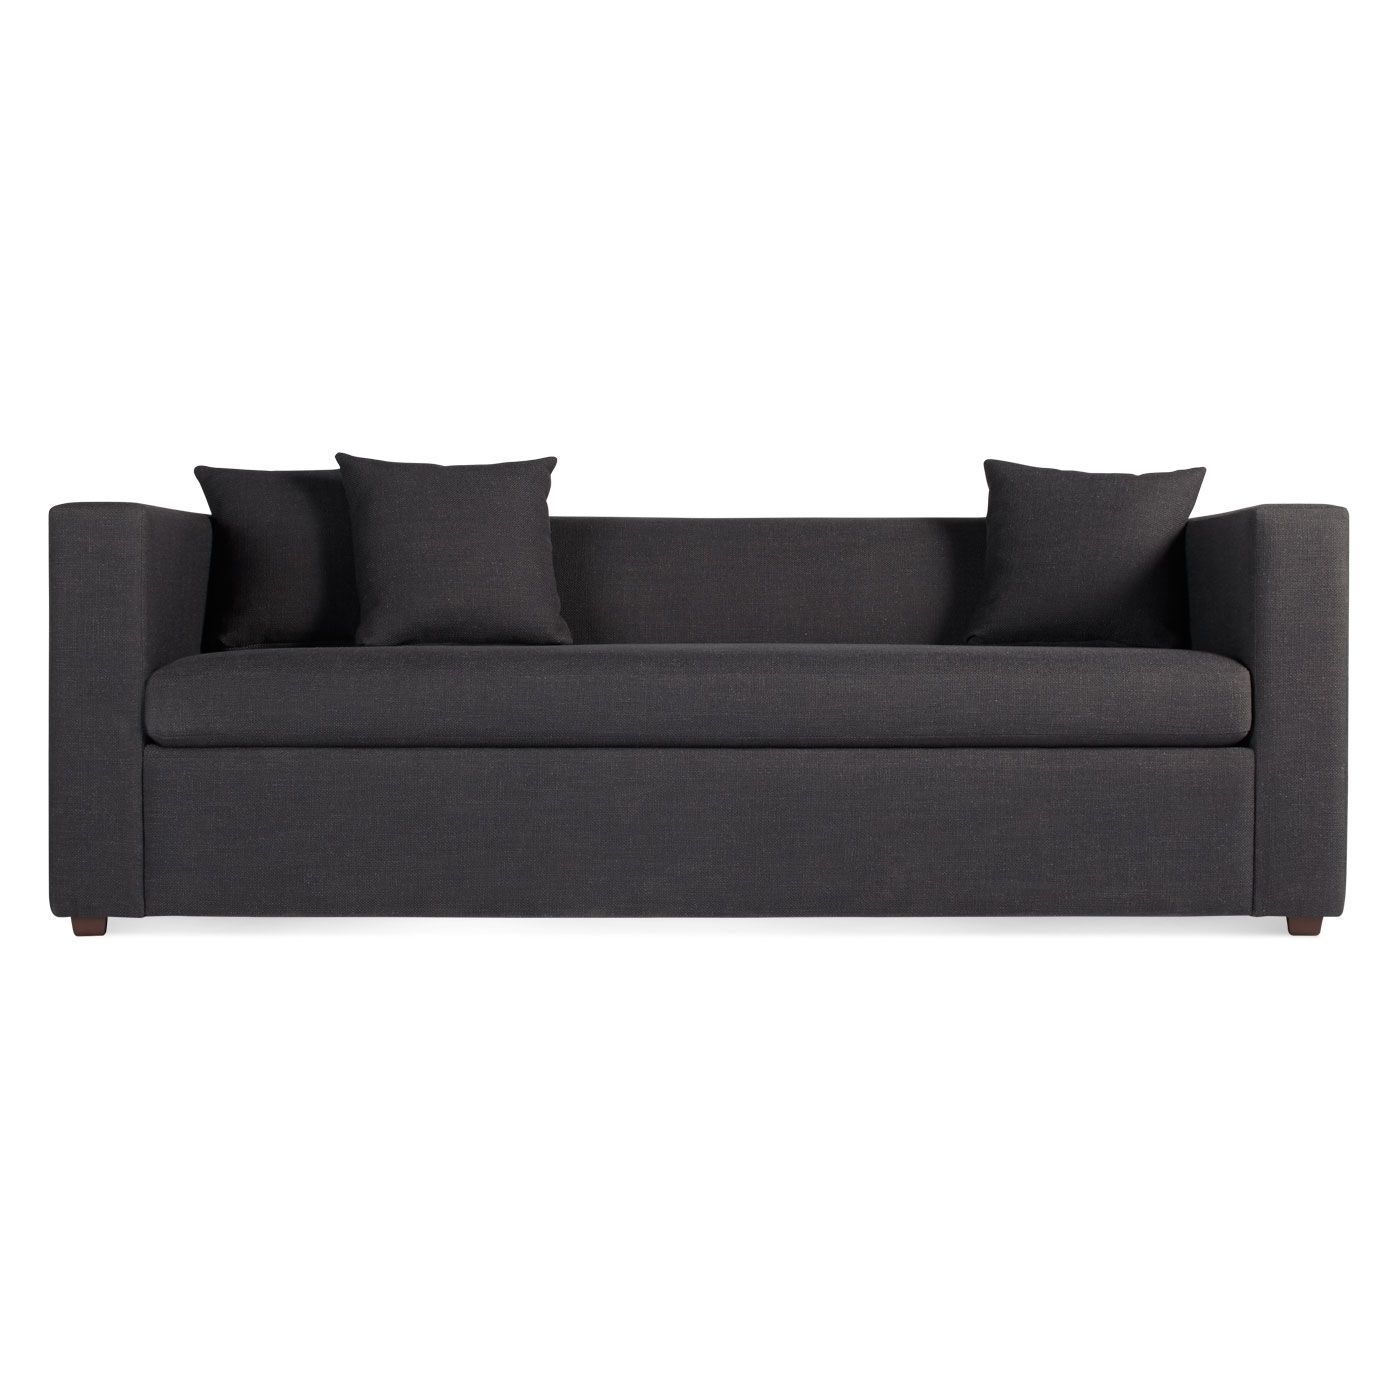 Furniture : Mattress Firm 77057 Sleeper Sectional Sofa For Small Throughout Tuscaloosa Sectional Sofas (View 10 of 10)